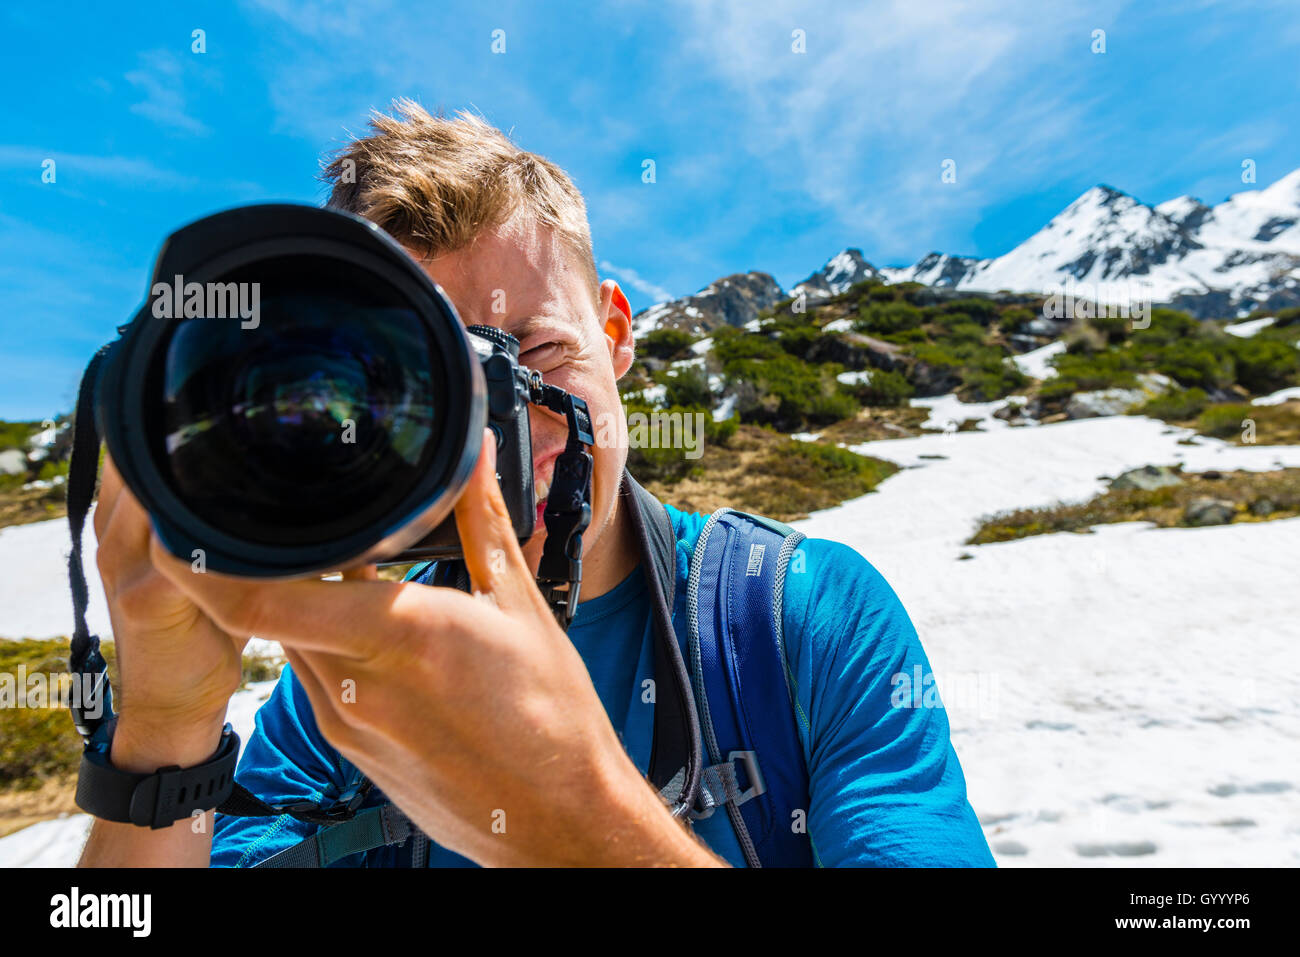 Young man photographing, Rohrmoos-Untertal, Schladming Tauern, Schladming, Styria, Austria Stock Photo